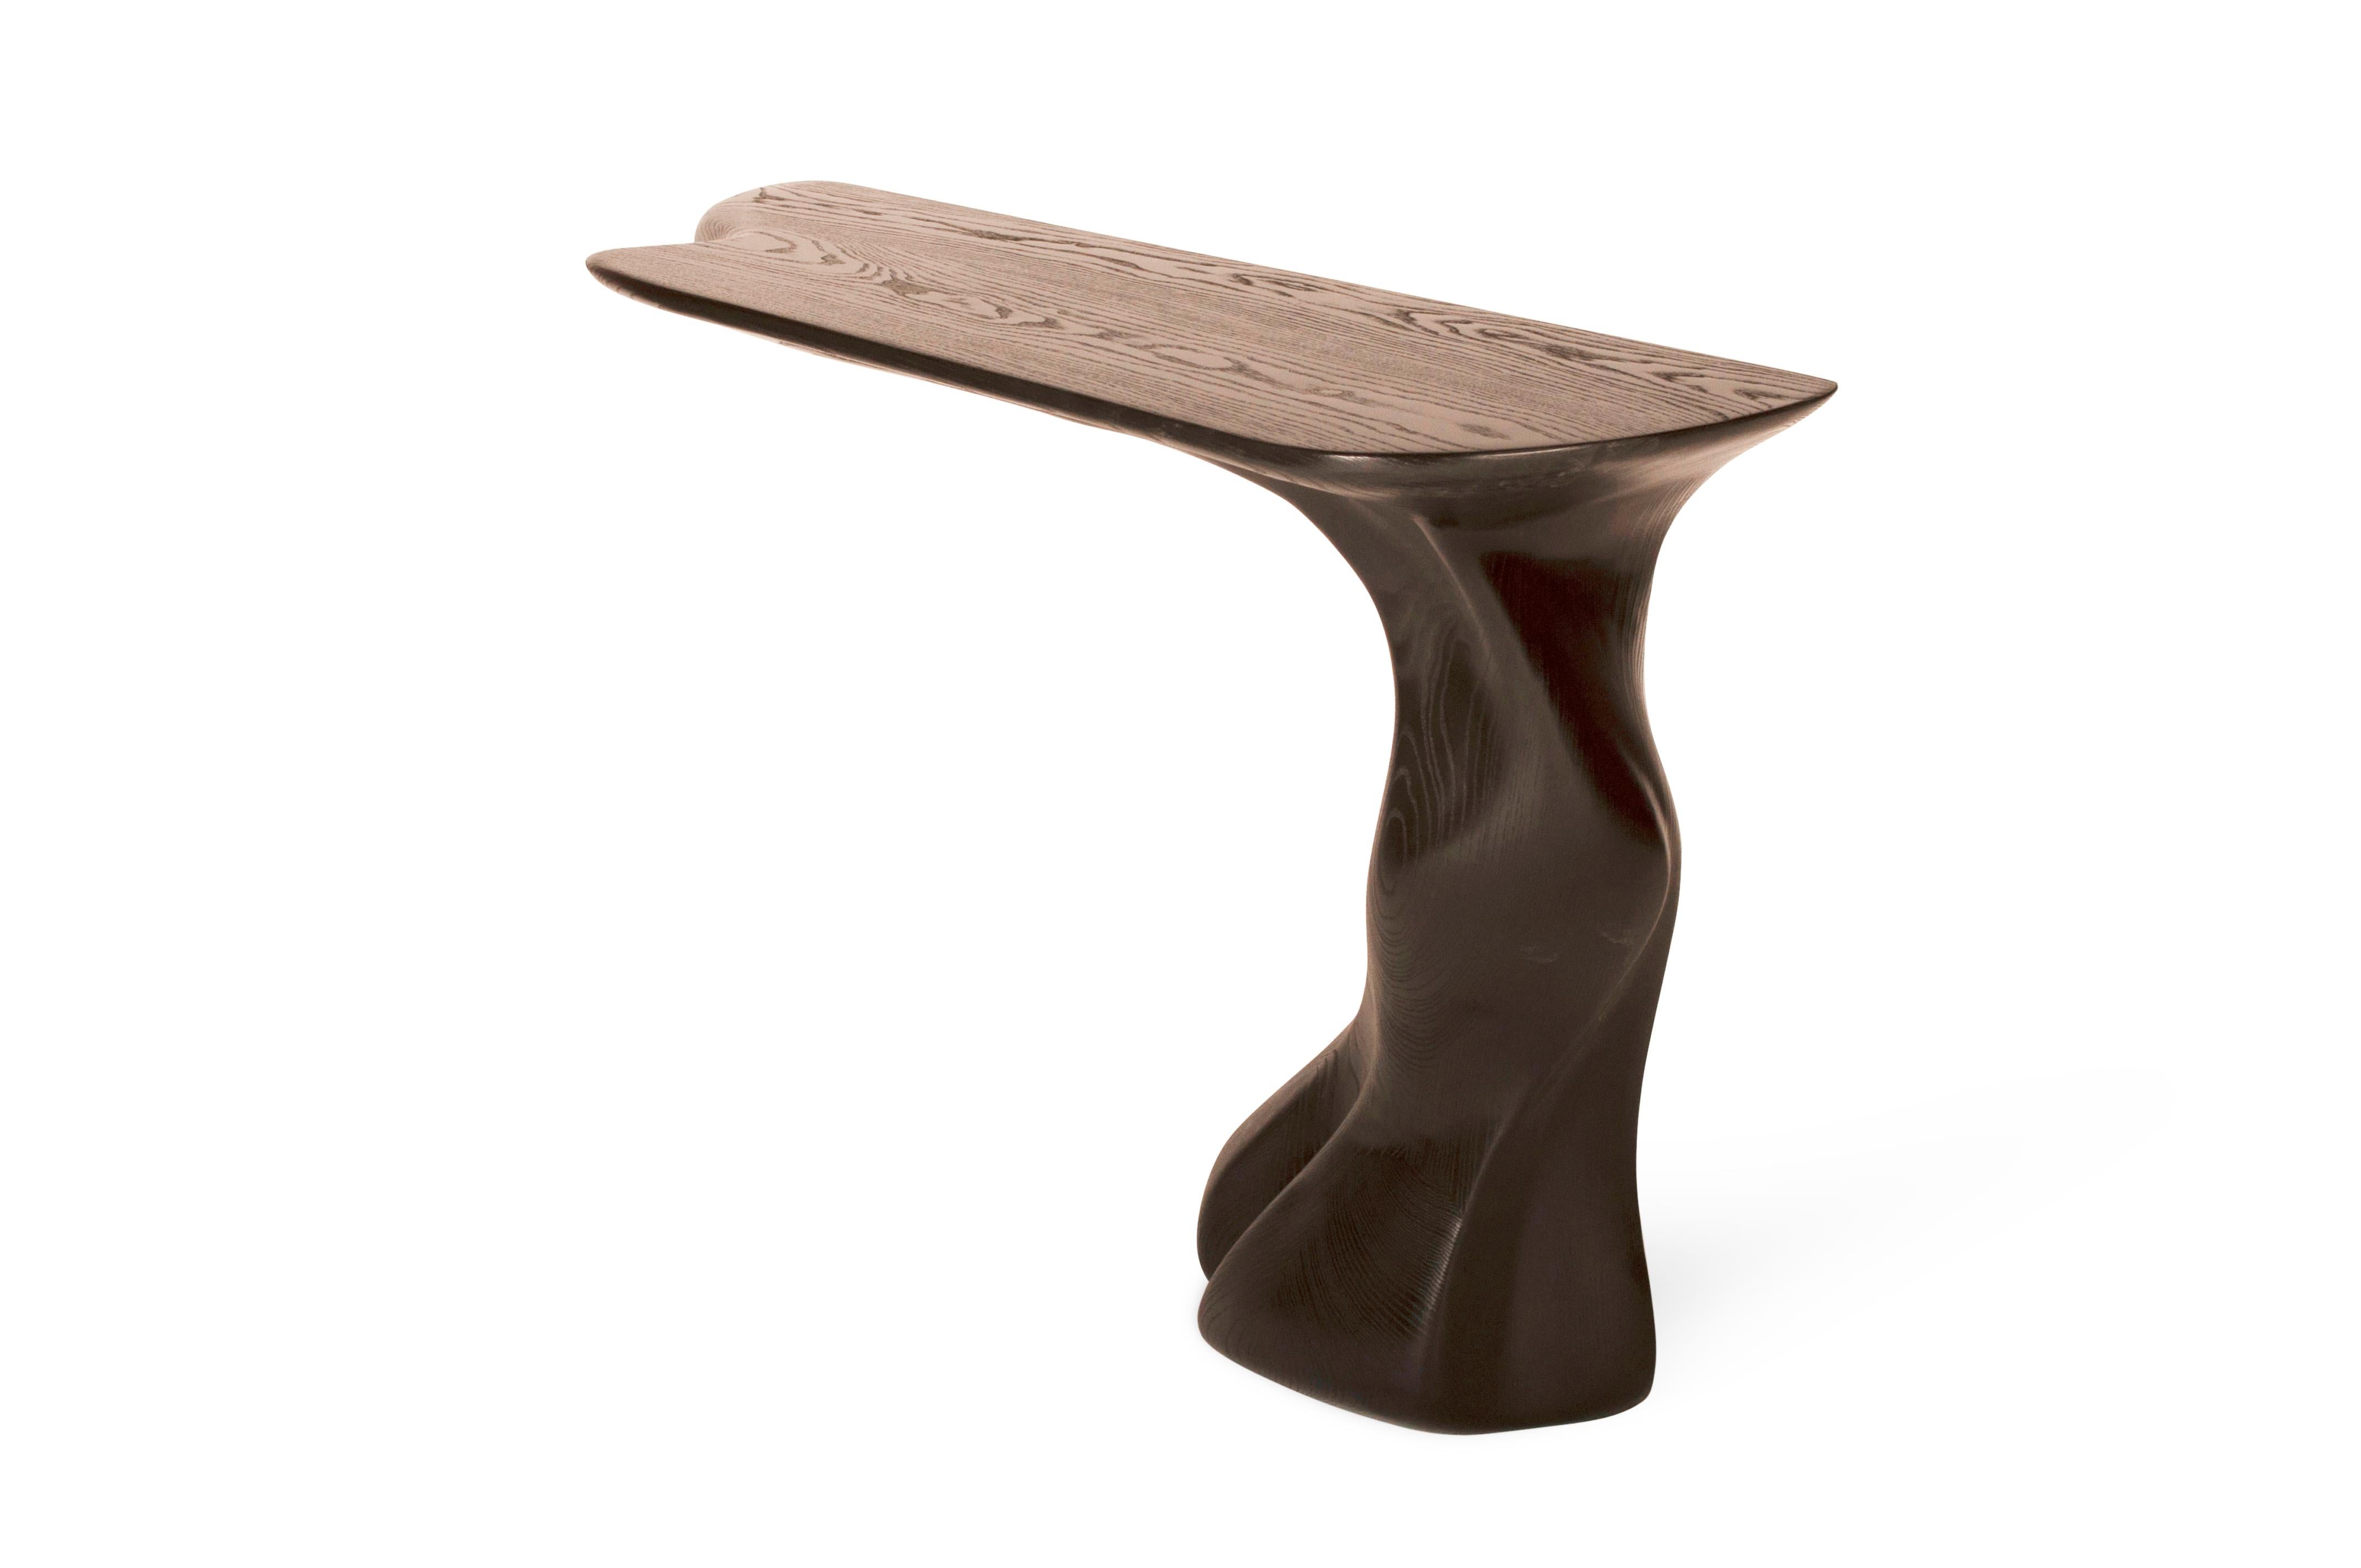 Contemporary Amorph Frolic modern wall mounted Console, Ebony Stain on Ash wood Facing Right For Sale